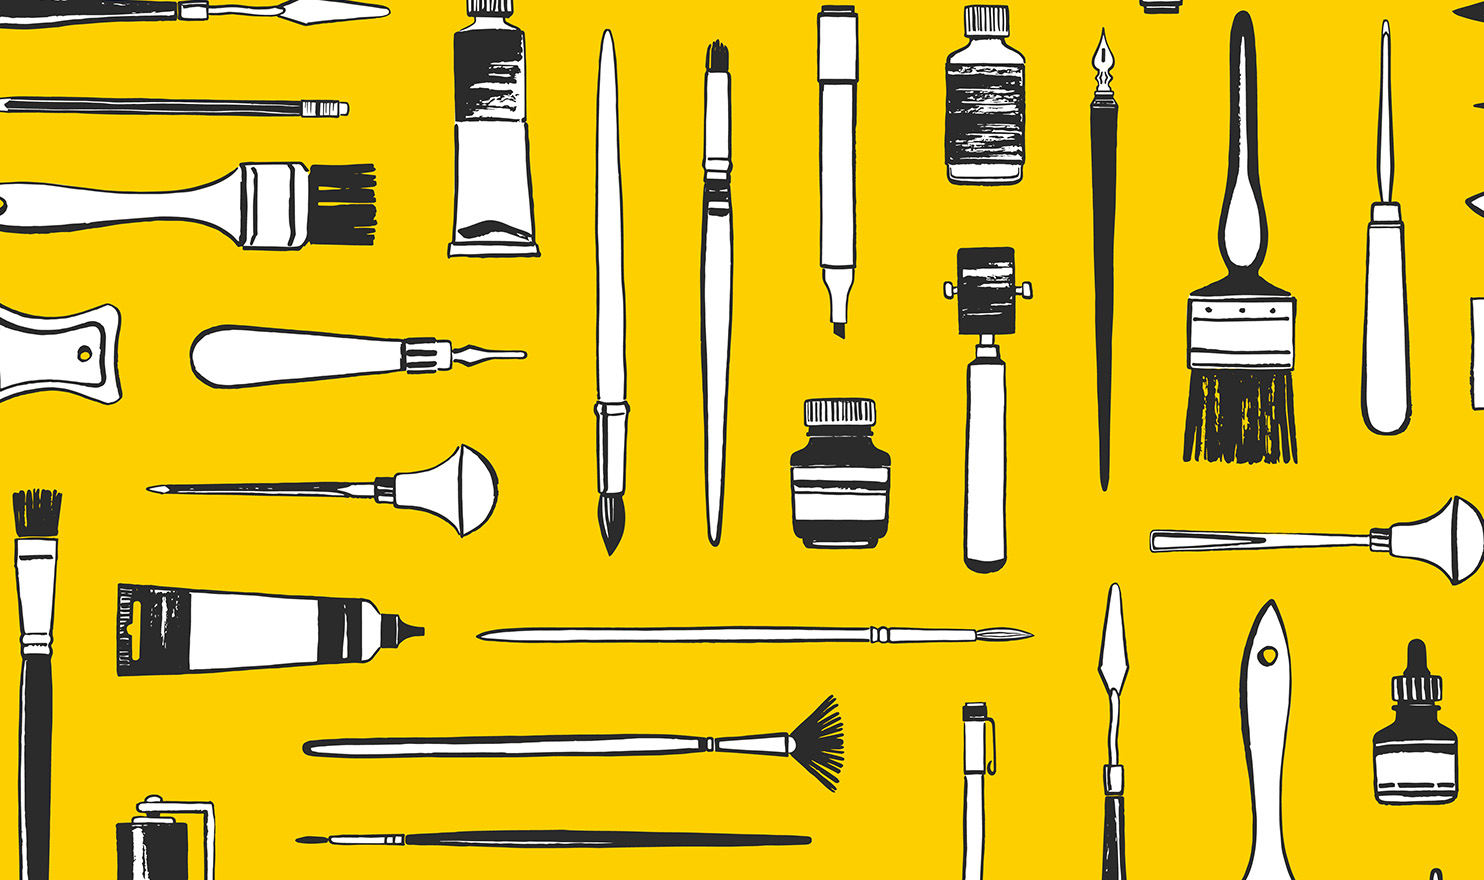 An illustration of black and white crafting and artist tools on a yellow background.